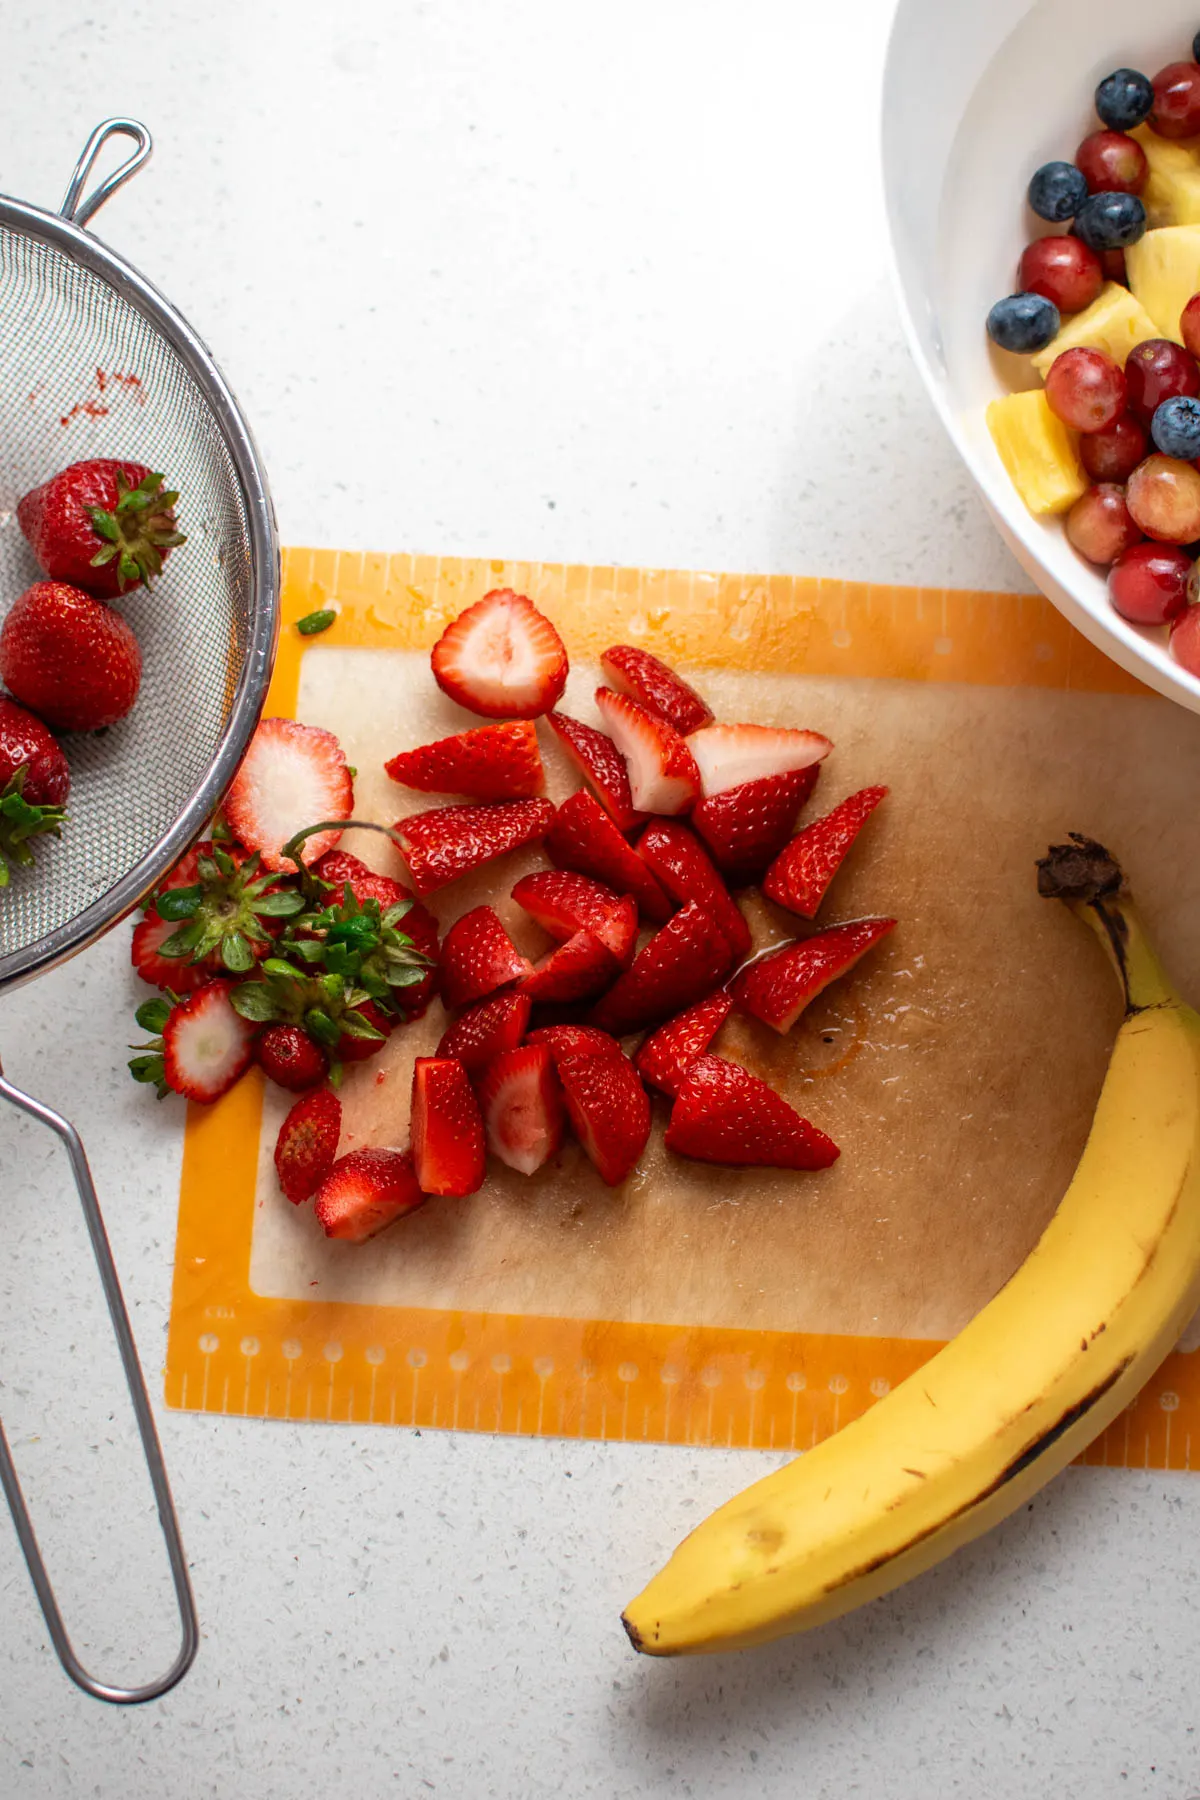 Chopped strawberries on cutting board with banana and large bowl of fruit nearby.